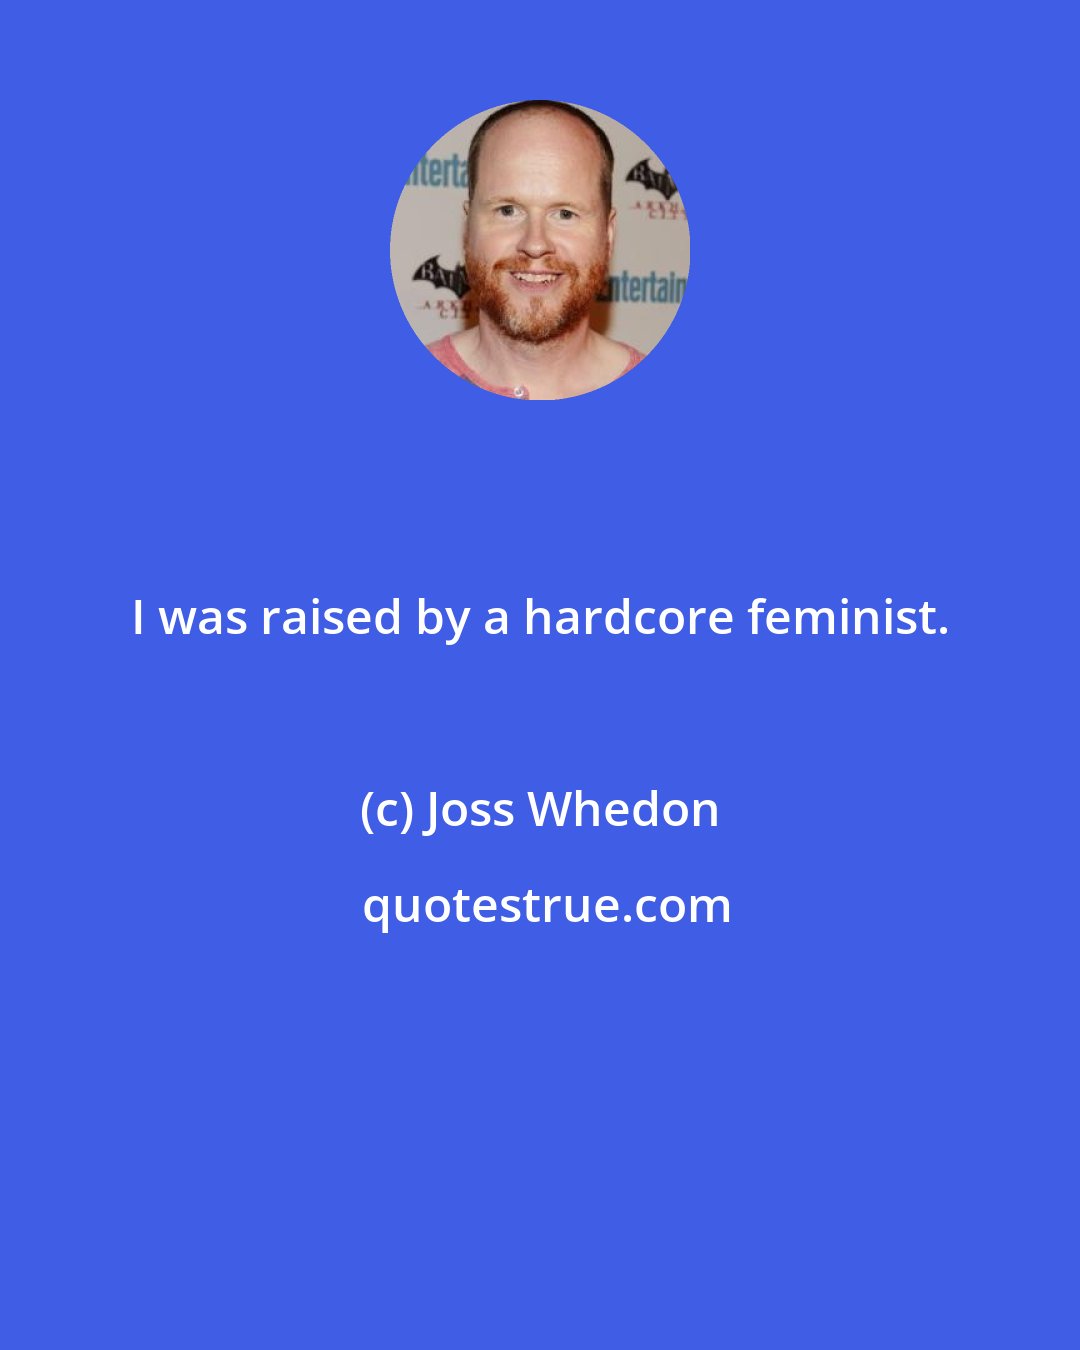 Joss Whedon: I was raised by a hardcore feminist.